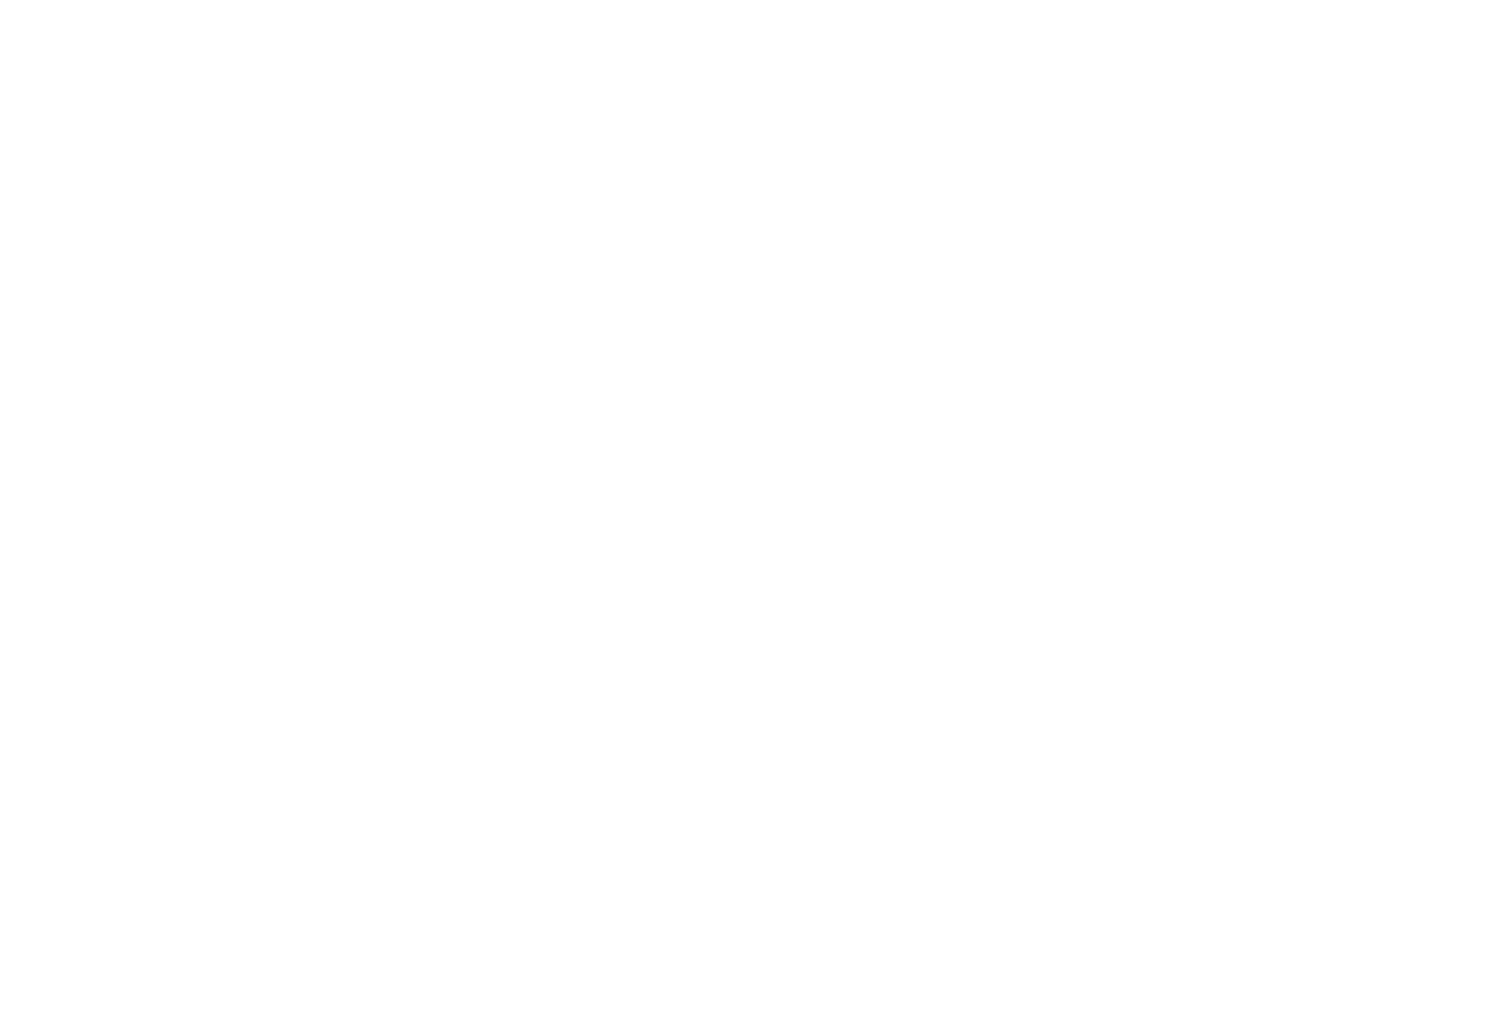 This is Old Town